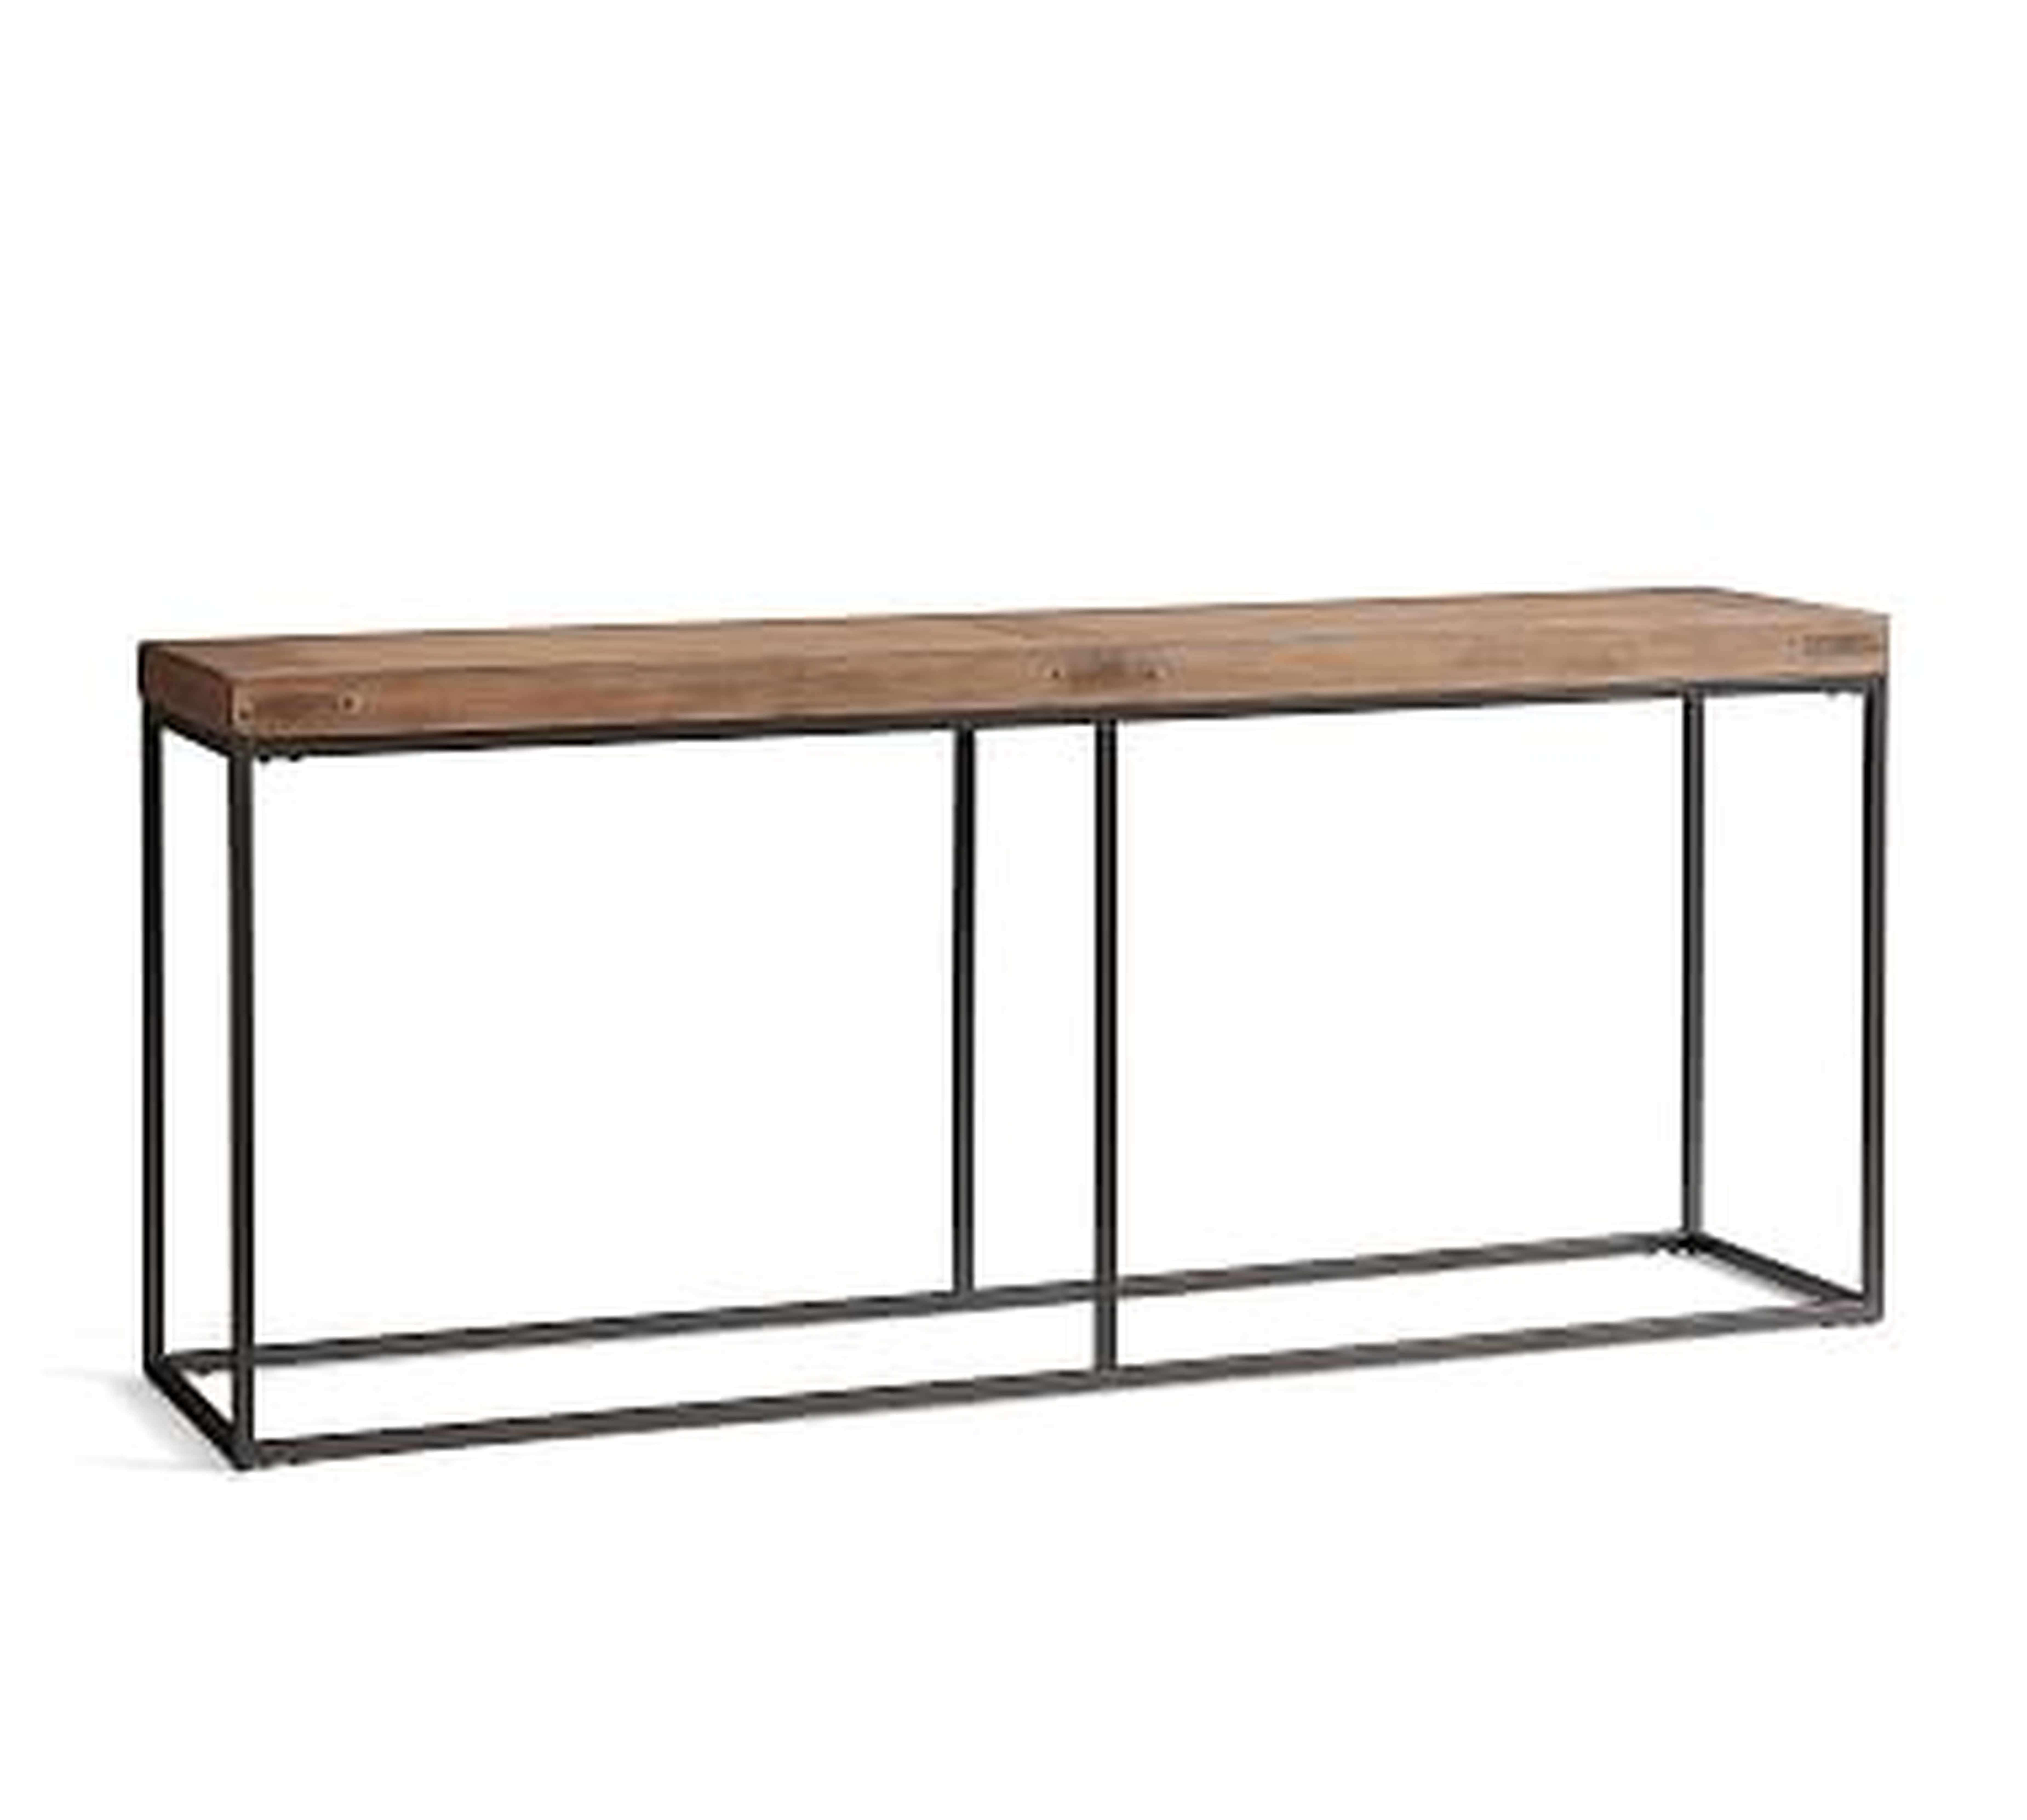 Malcolm 71" Wood Console Table, Glazed Pine - Pottery Barn